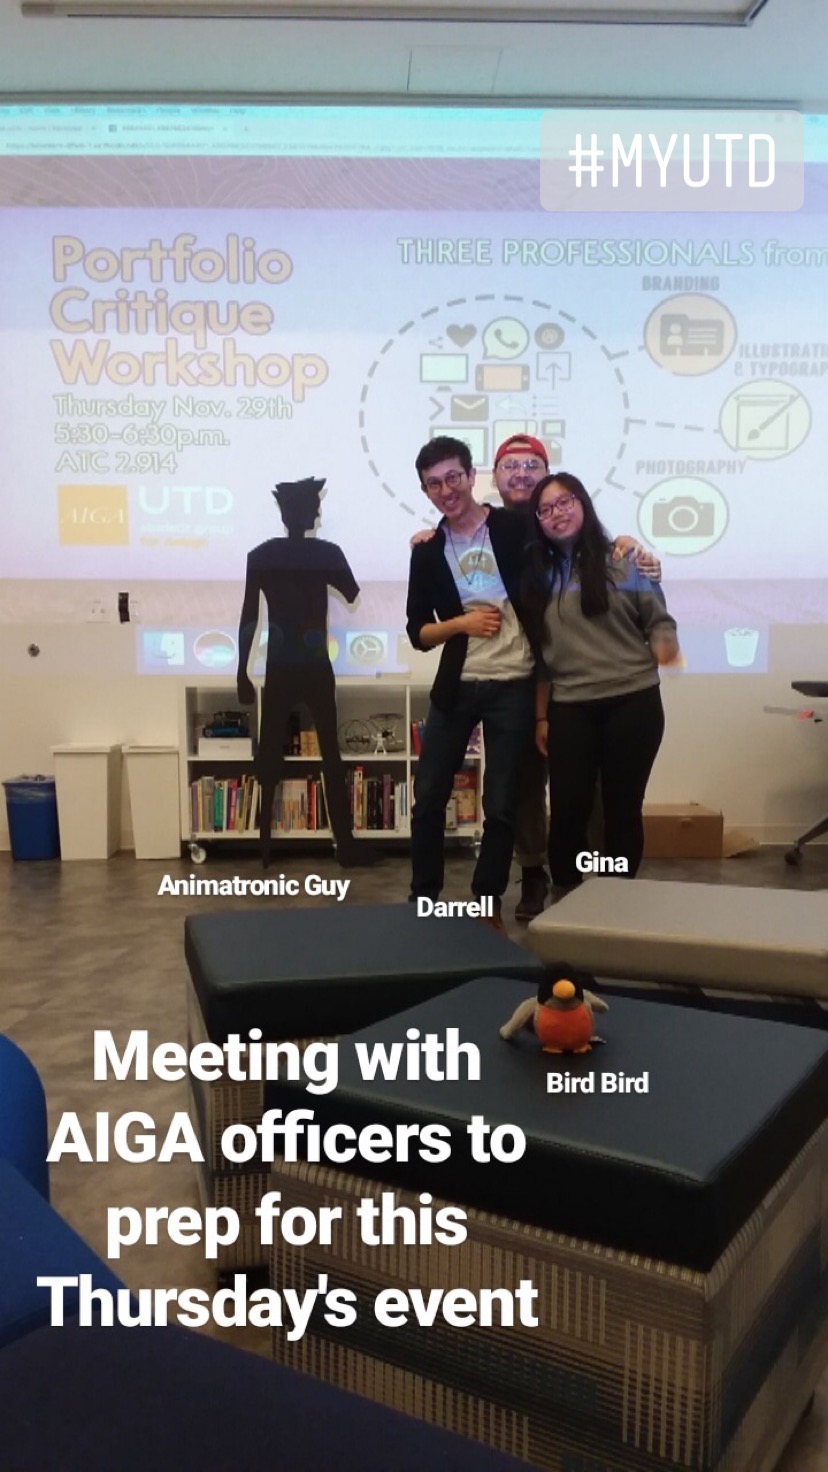 Three people standing close together in front of a presentation display that reads, Portfolio Critique Workshop. There is also a cutout of a person made of black paper. Bird figurine is present. 